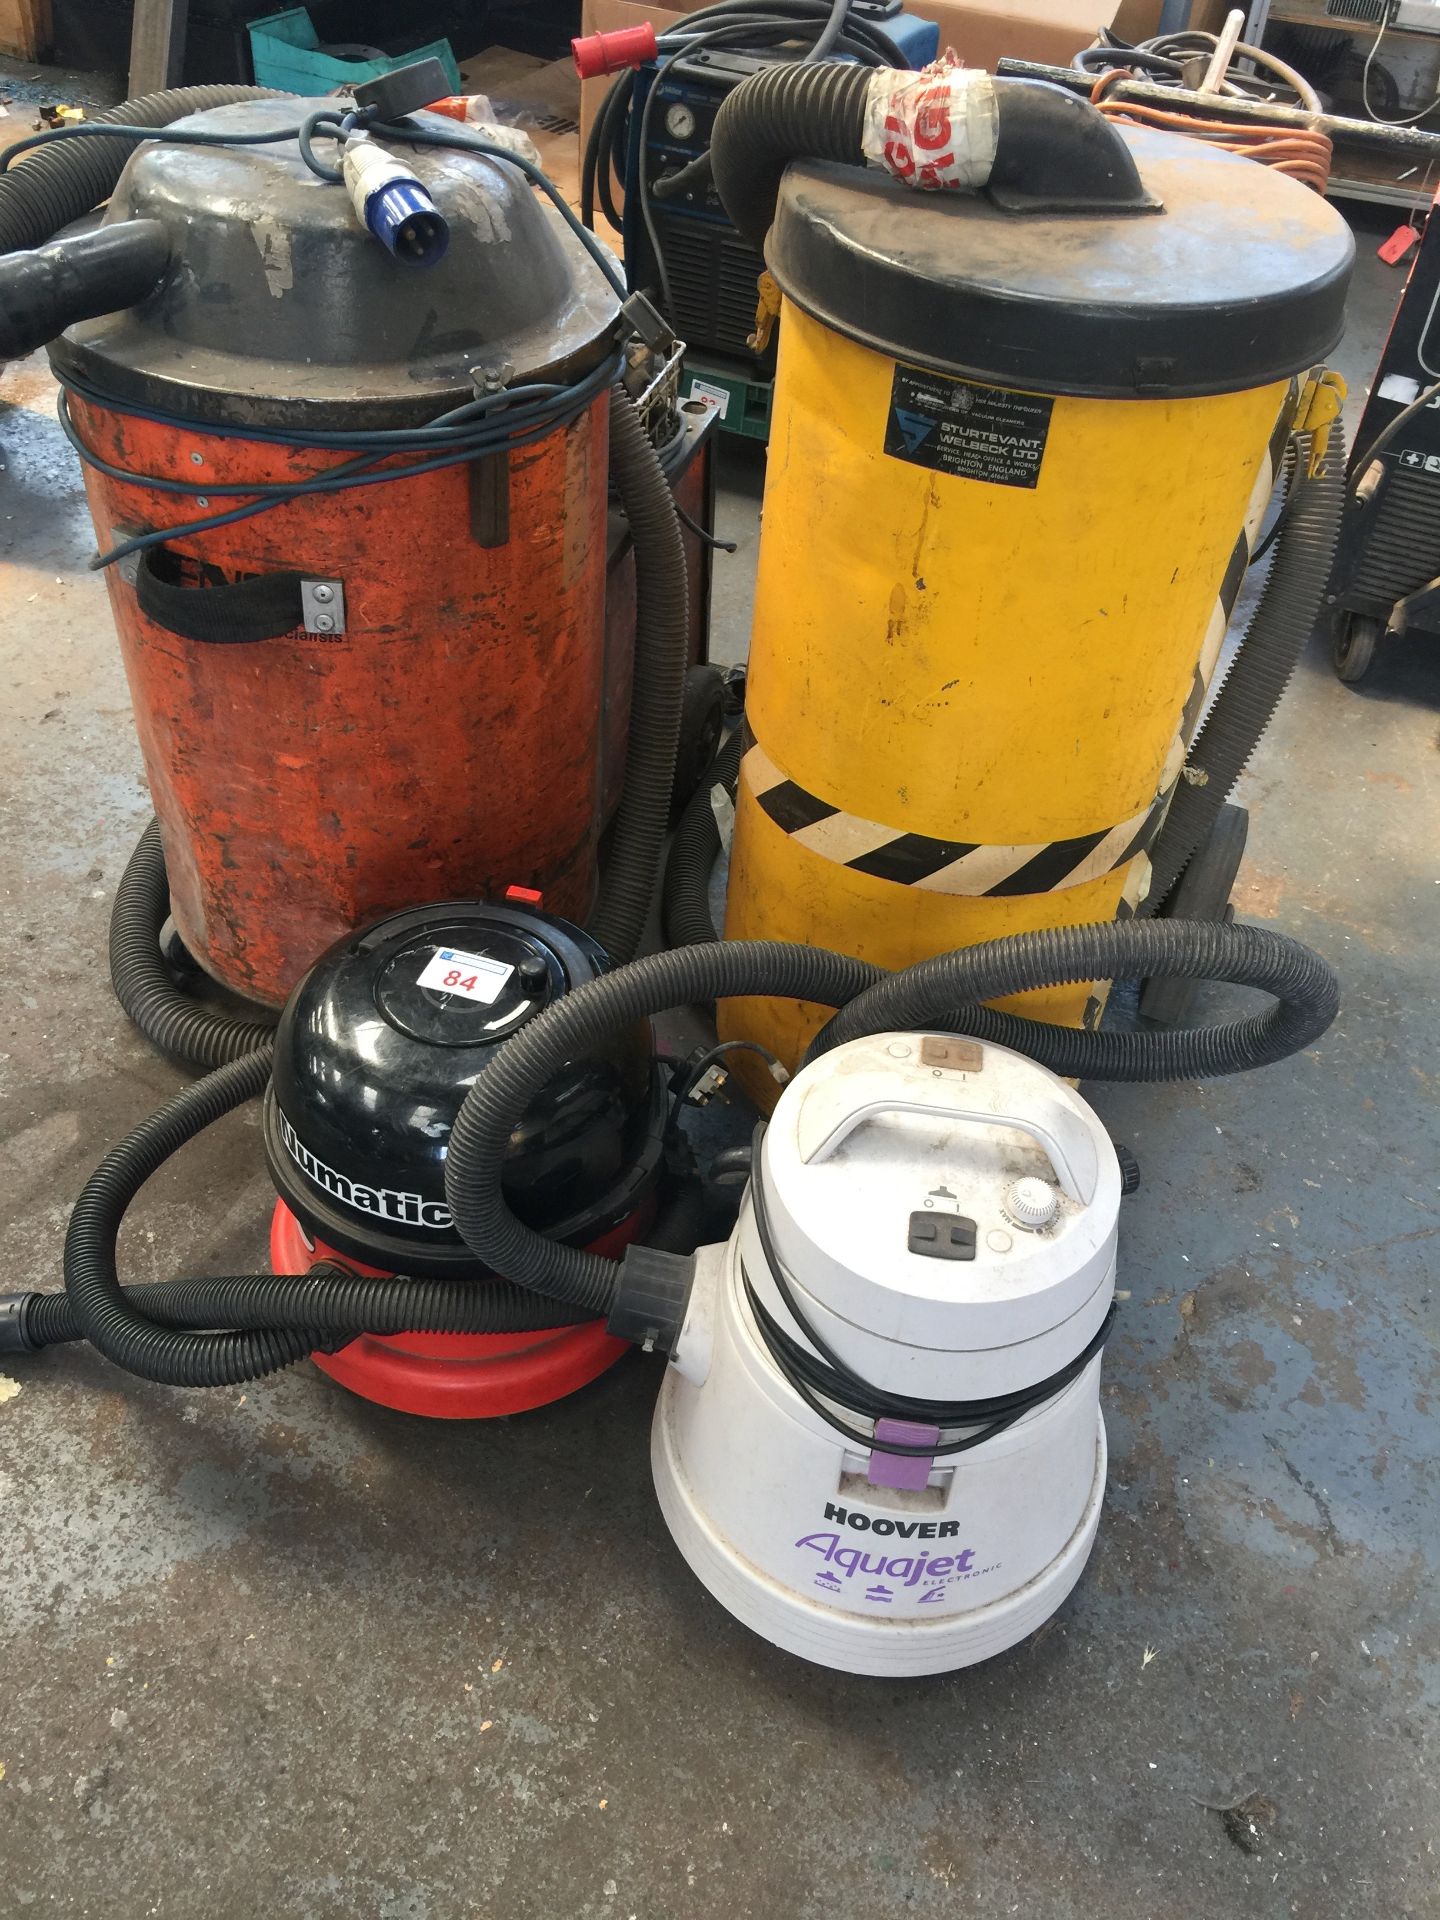 2 x Industrial hoovers, Henry hoover and 1 other (DERBY)